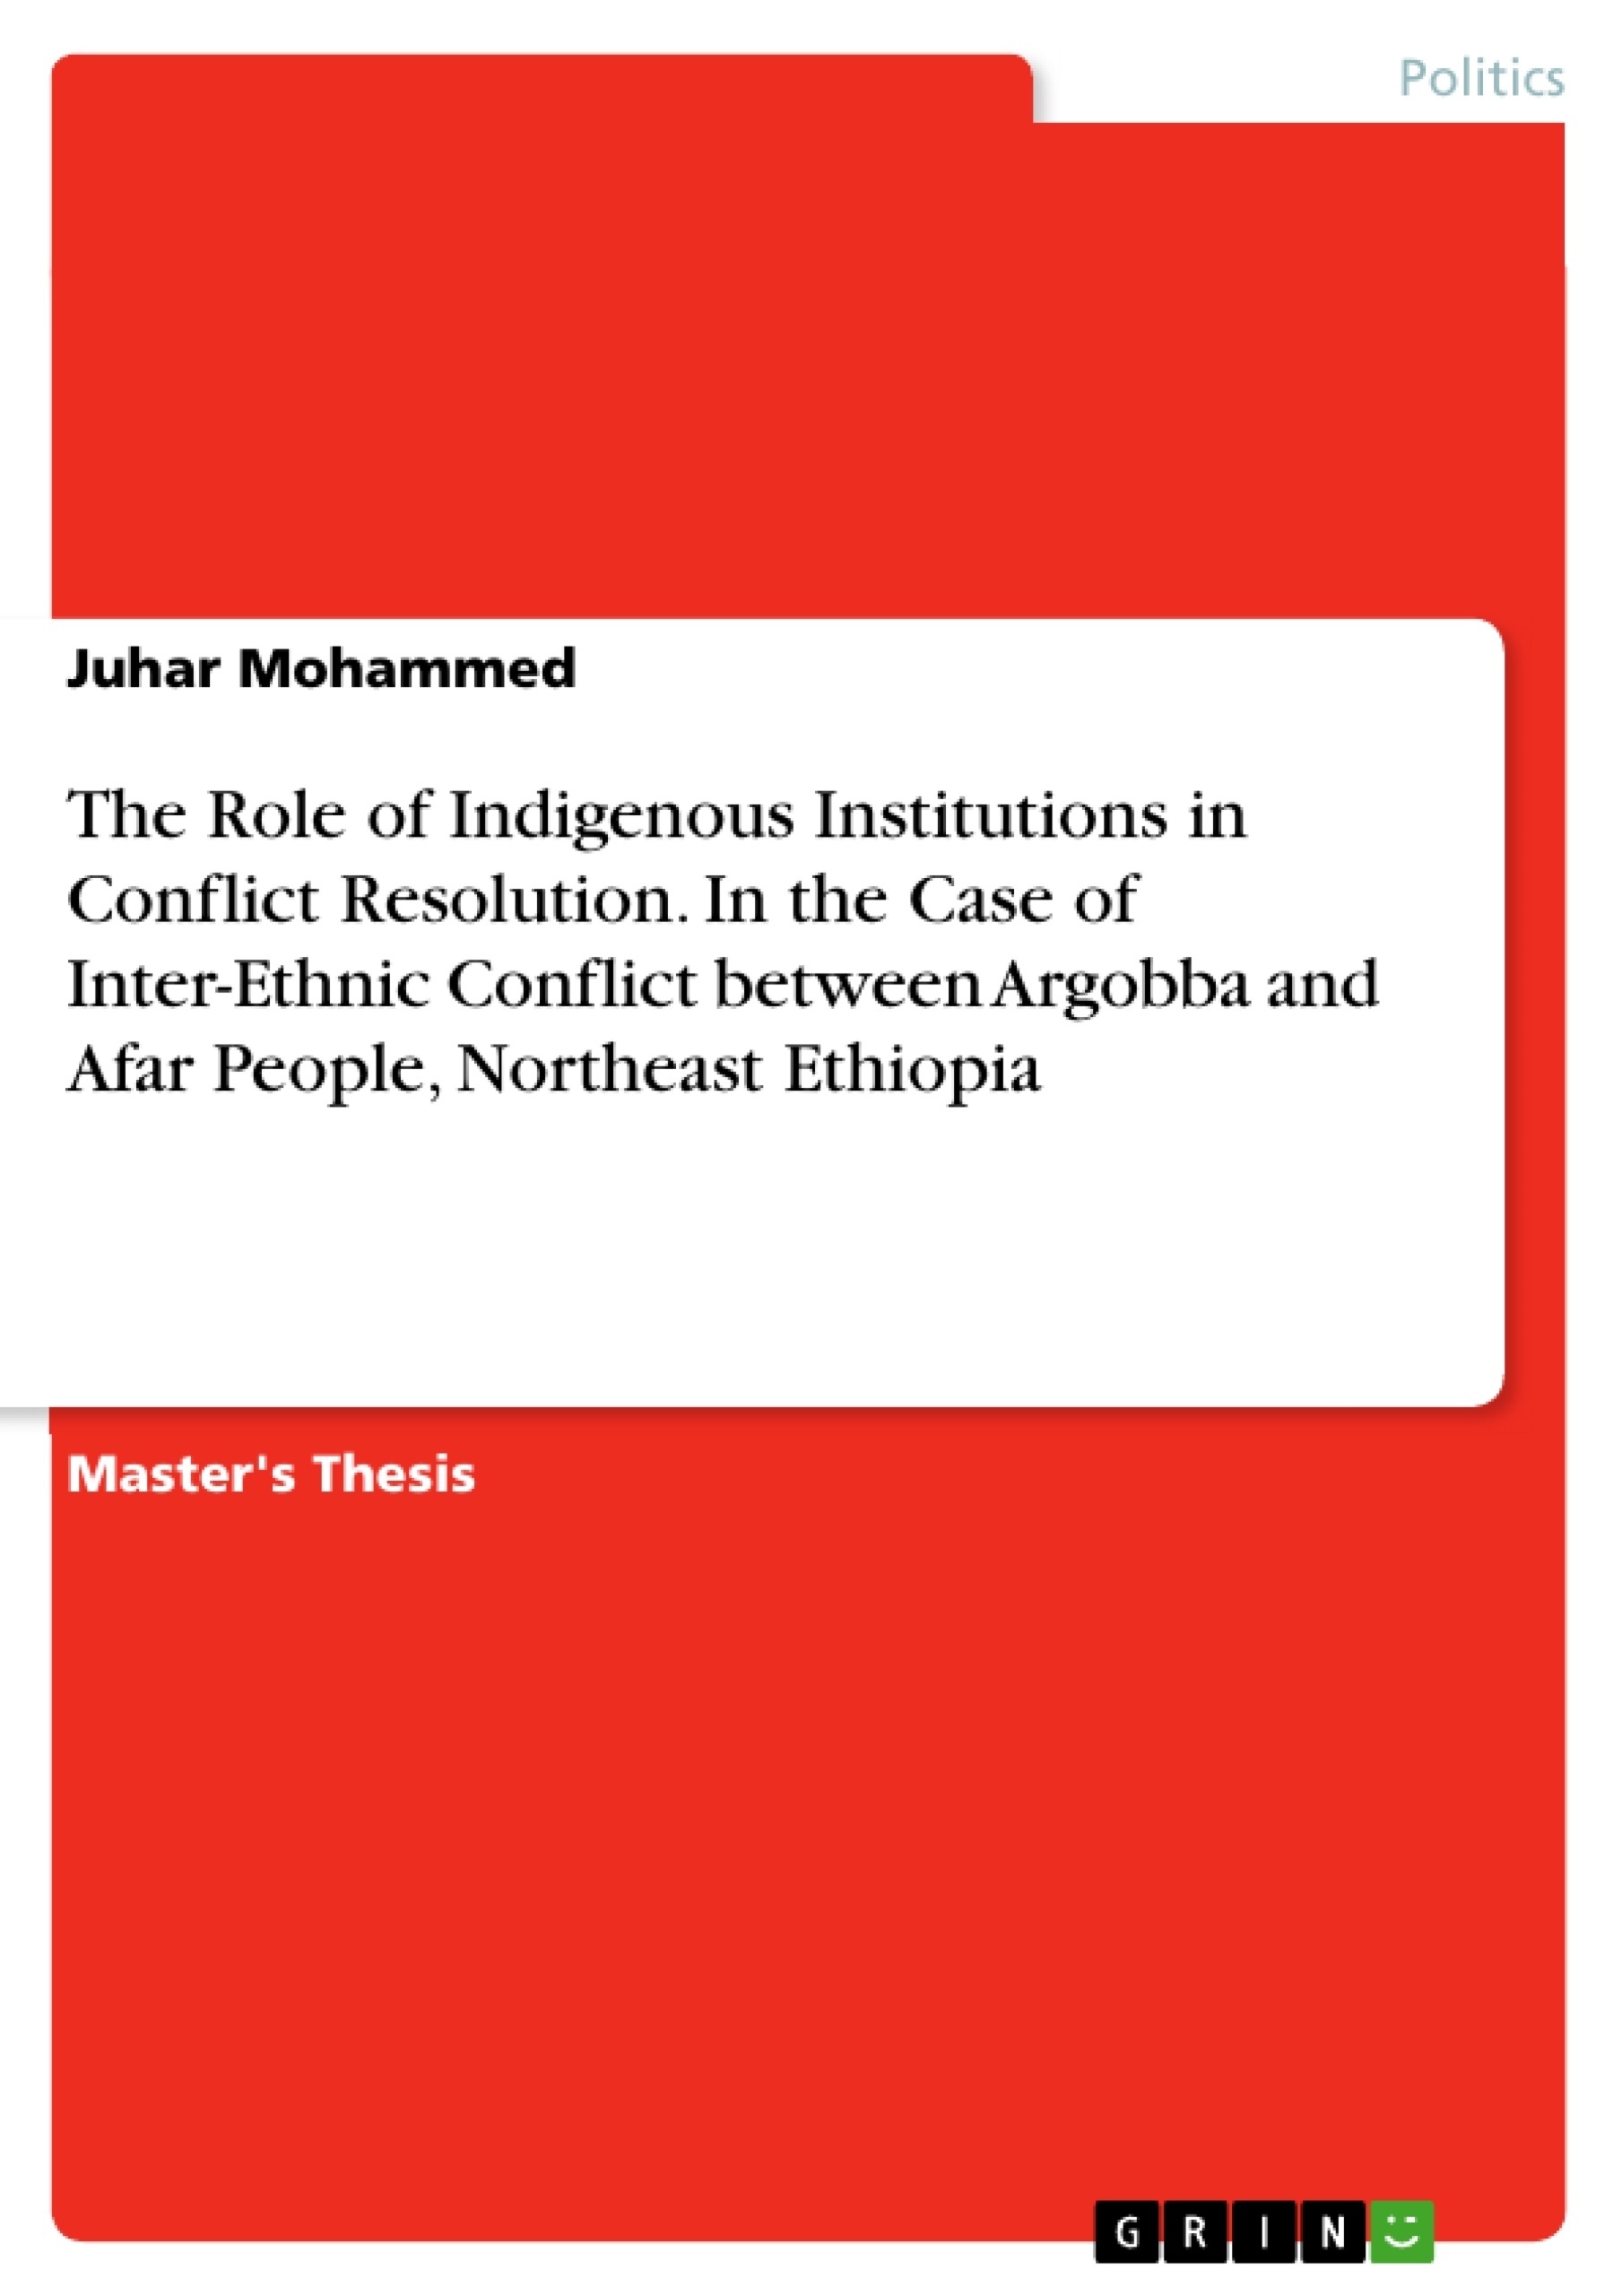 Title: The Role of Indigenous Institutions in Conflict Resolution. In the Case of Inter-Ethnic Conflict between Argobba and Afar People, Northeast Ethiopia